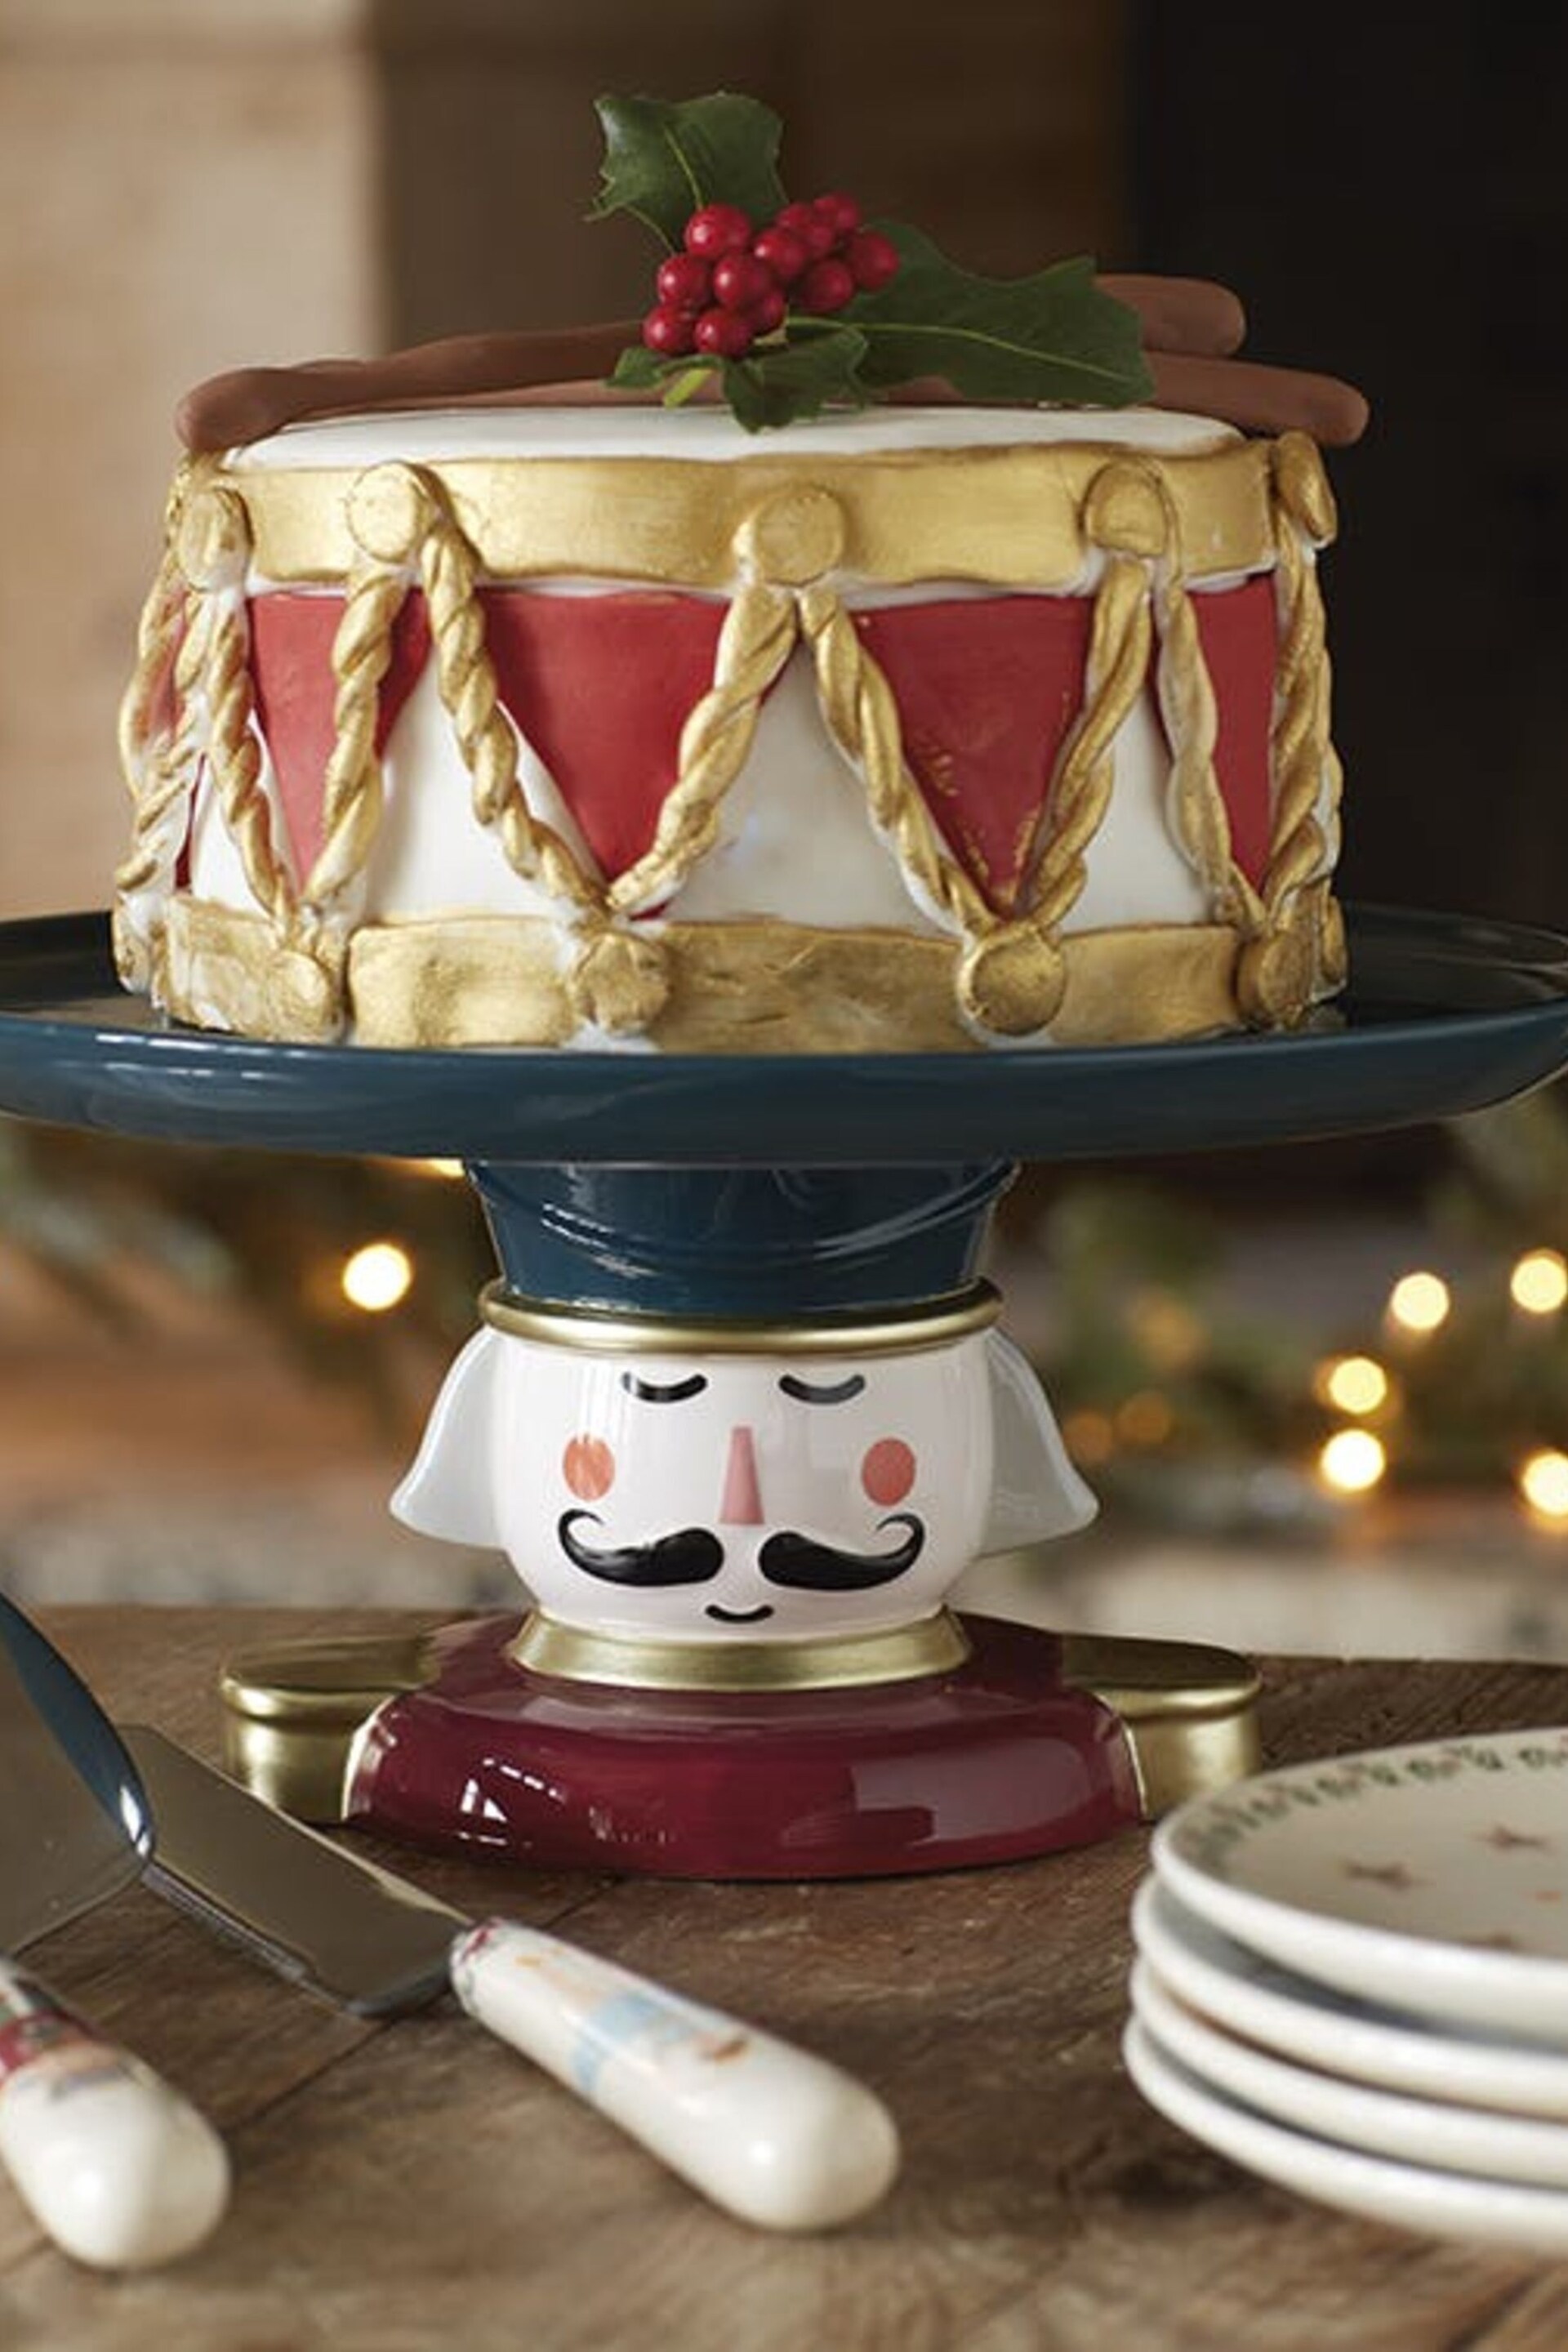 Kitchencraft The Nutcracker Collection 26.5cm Cake Stand - Image 1 of 2